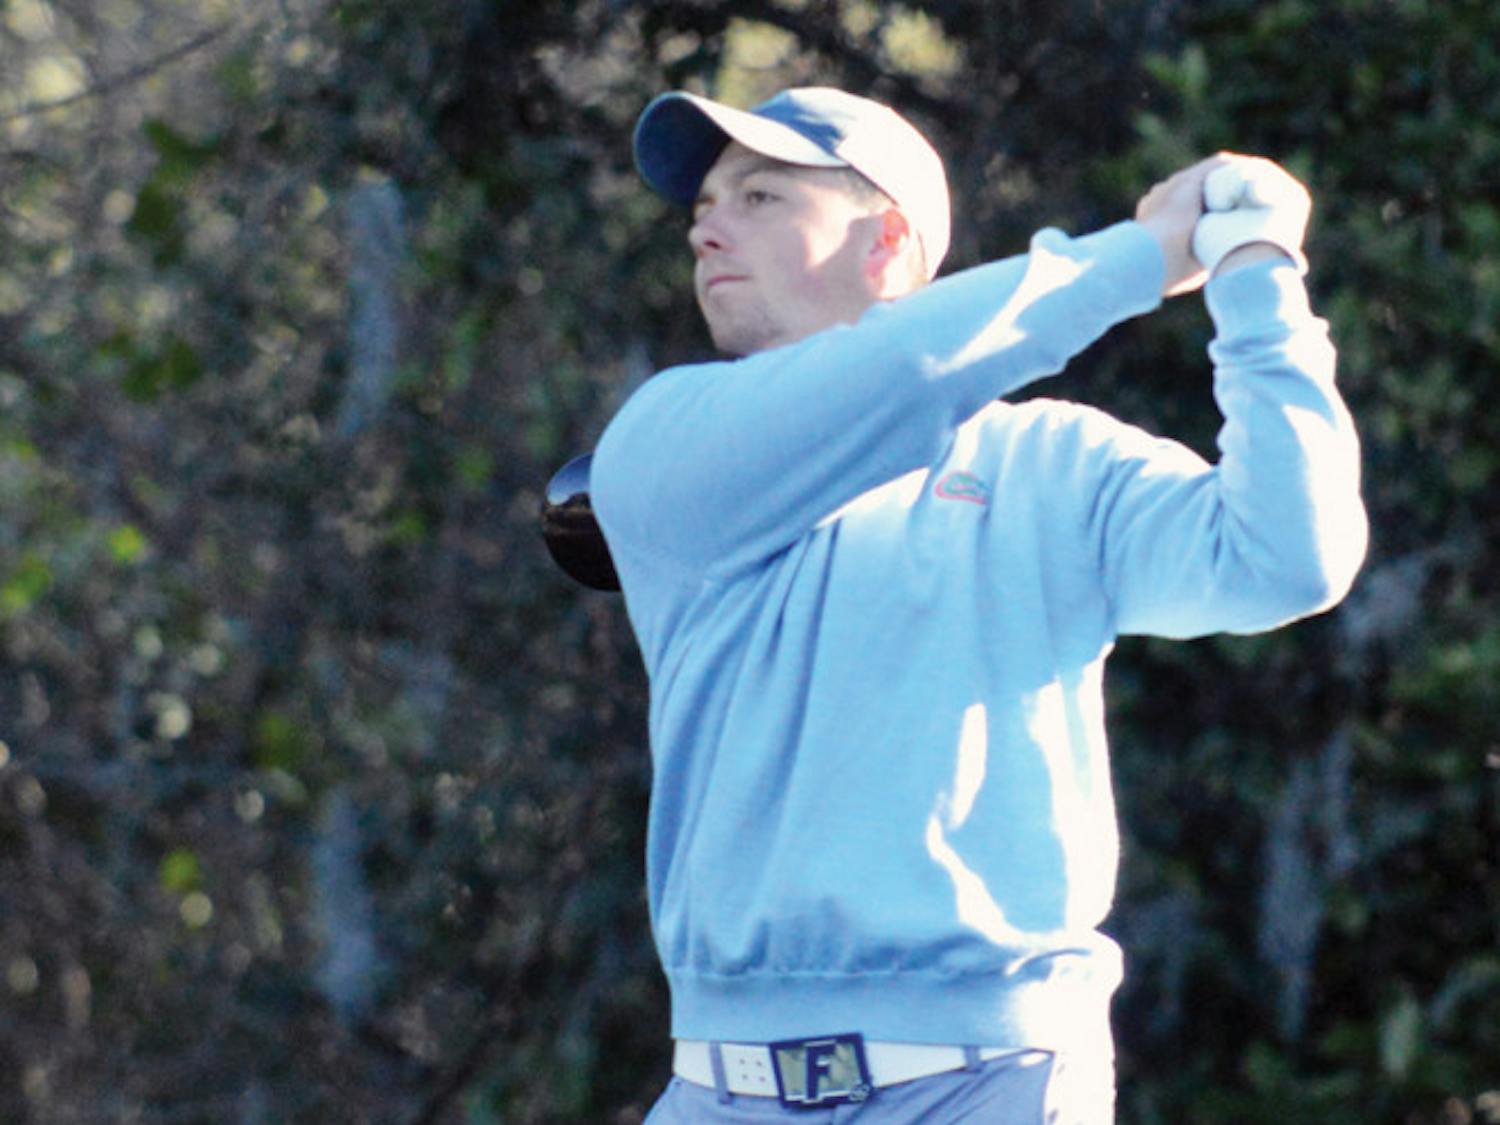 J.D. Tomlinson tees off during Day 2 of the SunTrust Gator Invitational on Feb. 16 at the Mark Bostick Golf Course.